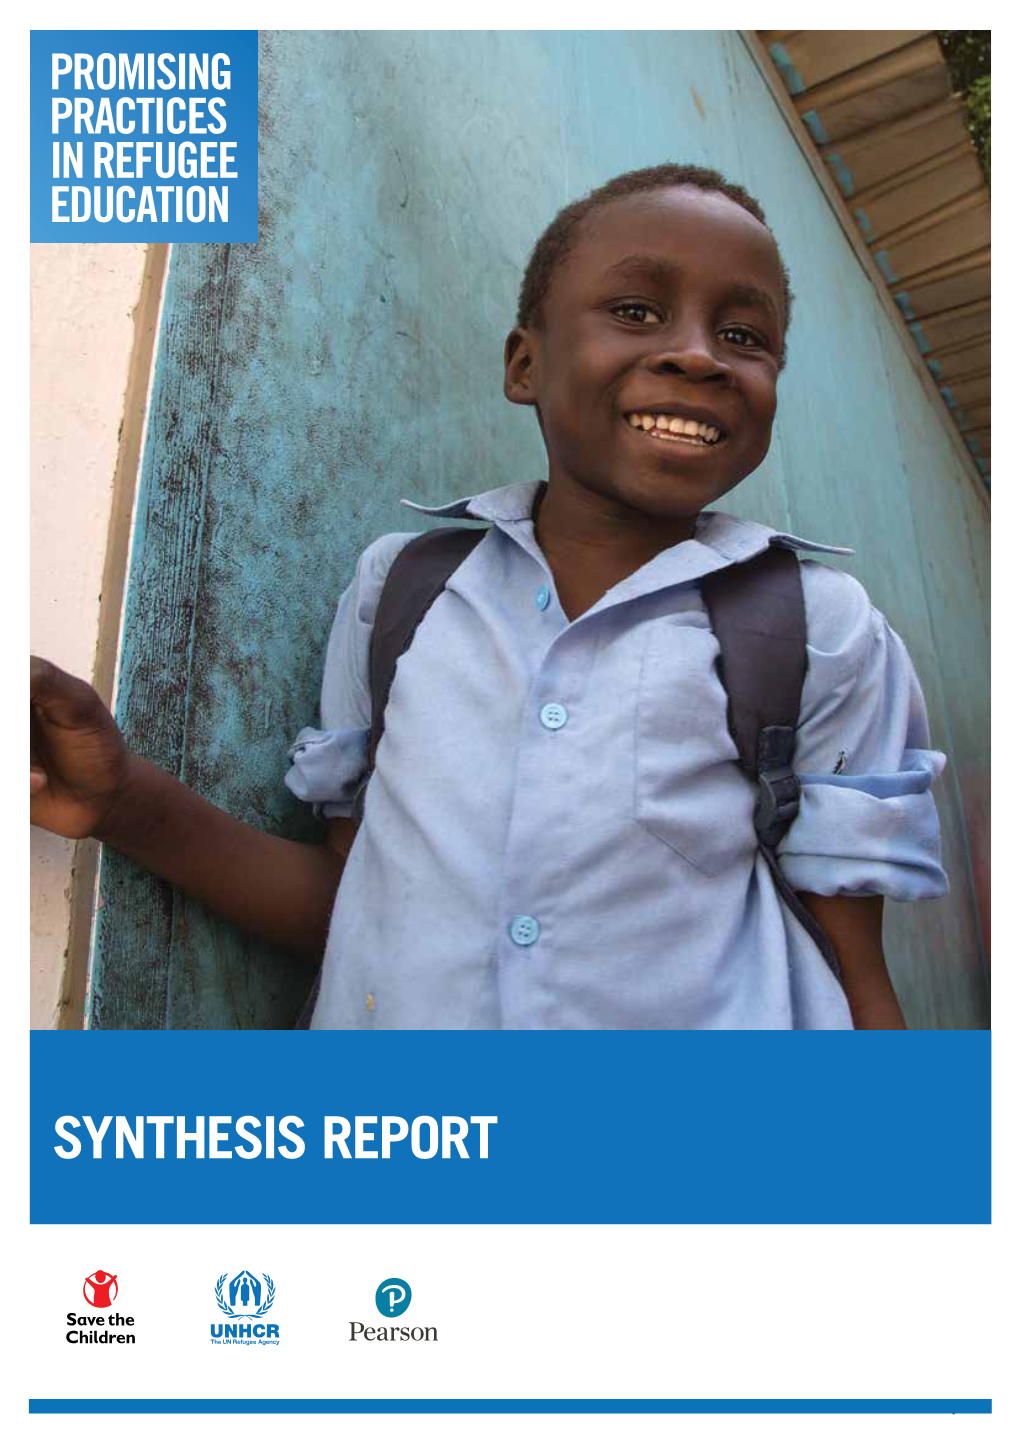 Promising Practices in Refugee Education: Synthesis Report